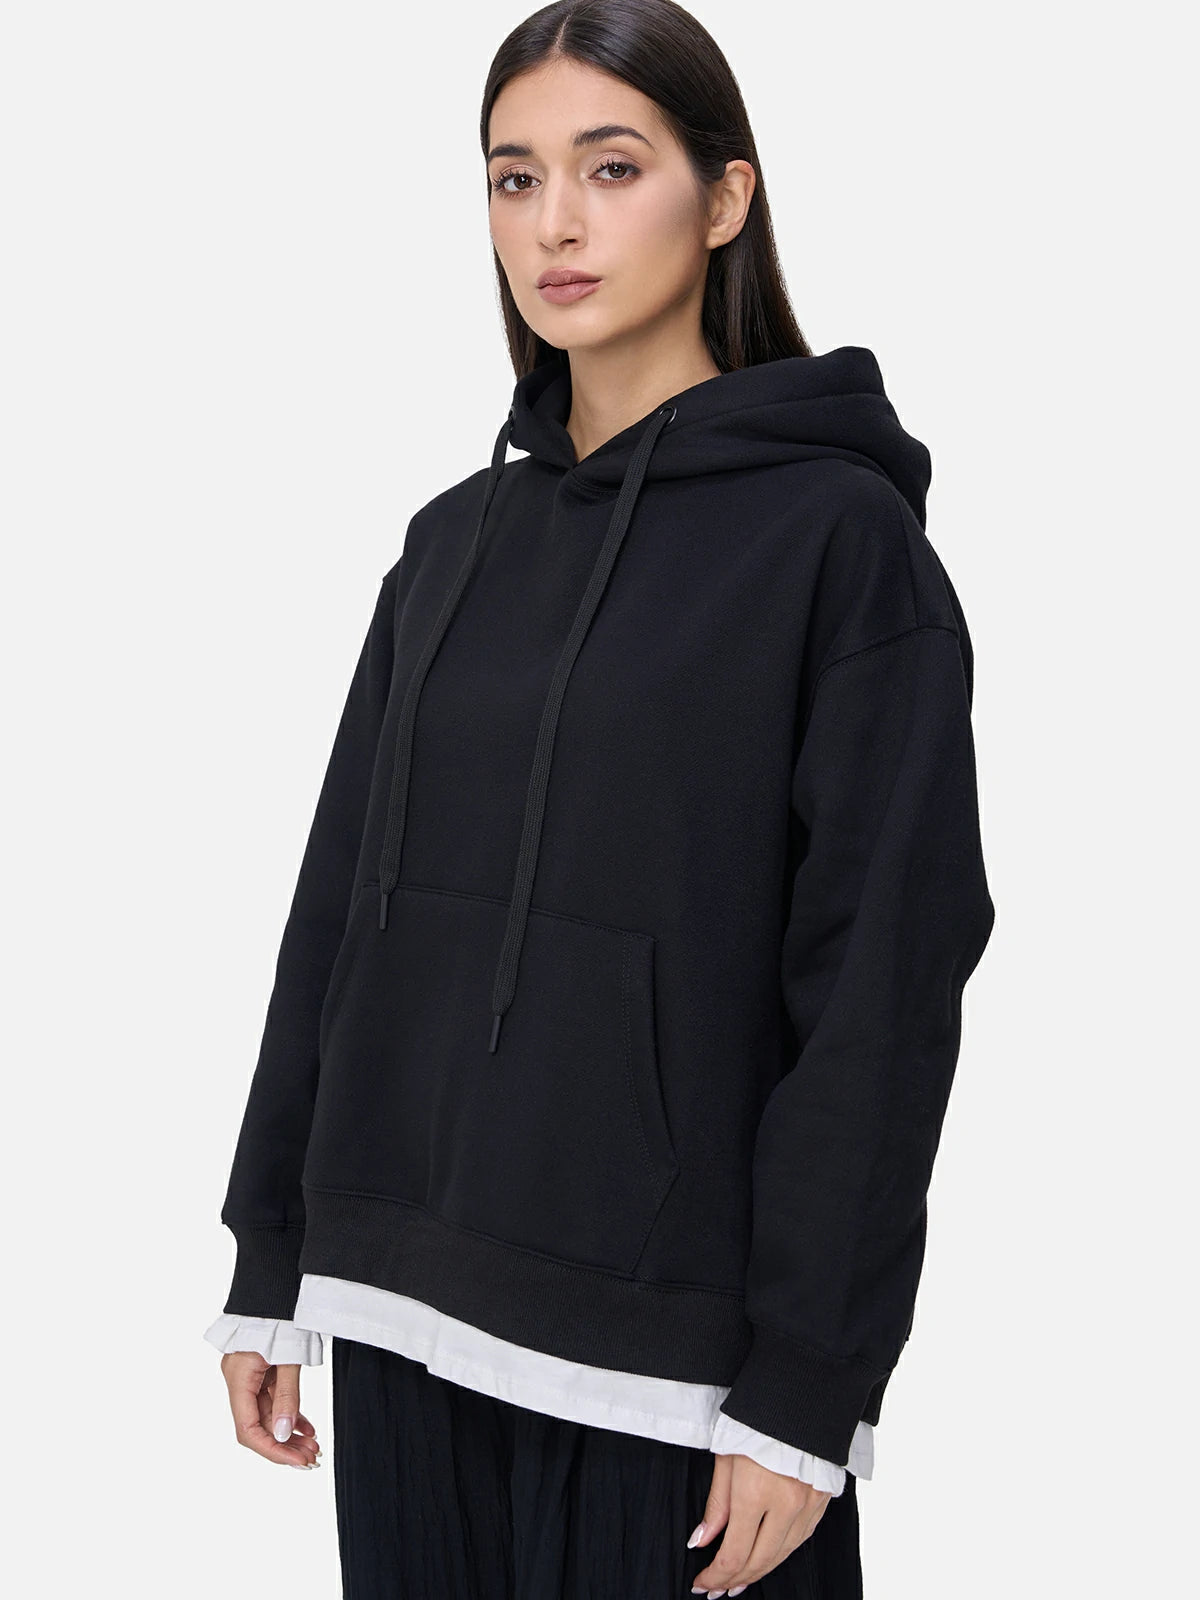 Stylish pairing with a black loose-fitting hooded sweatshirt